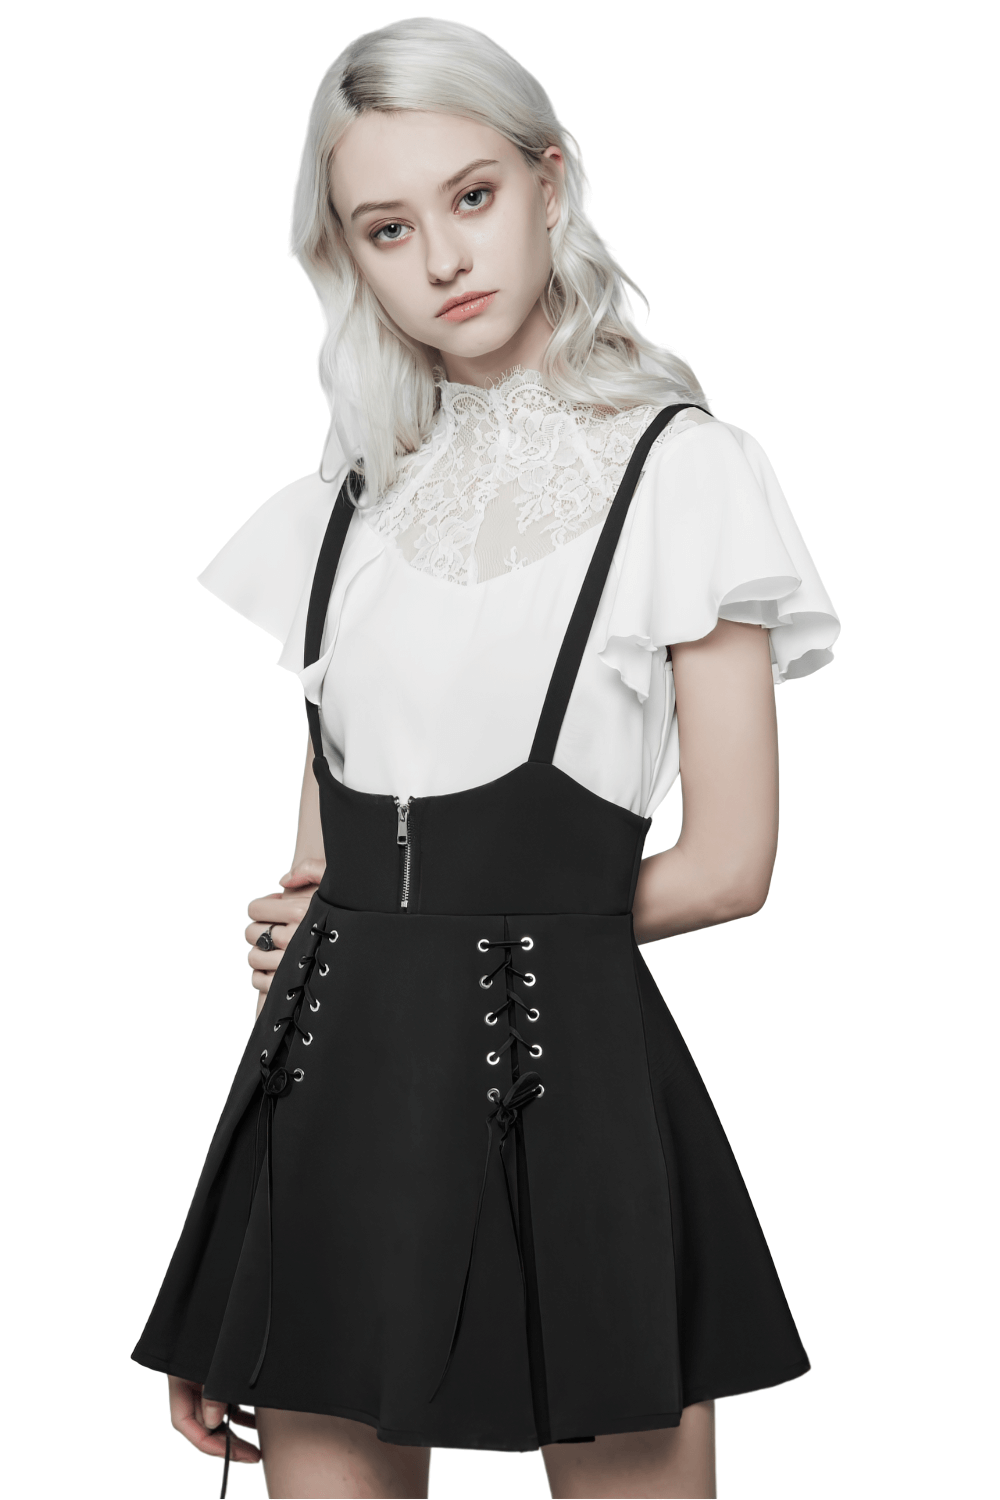 Punk Rave Black Gothic A-Line Skirt Zipper and Lace-Up